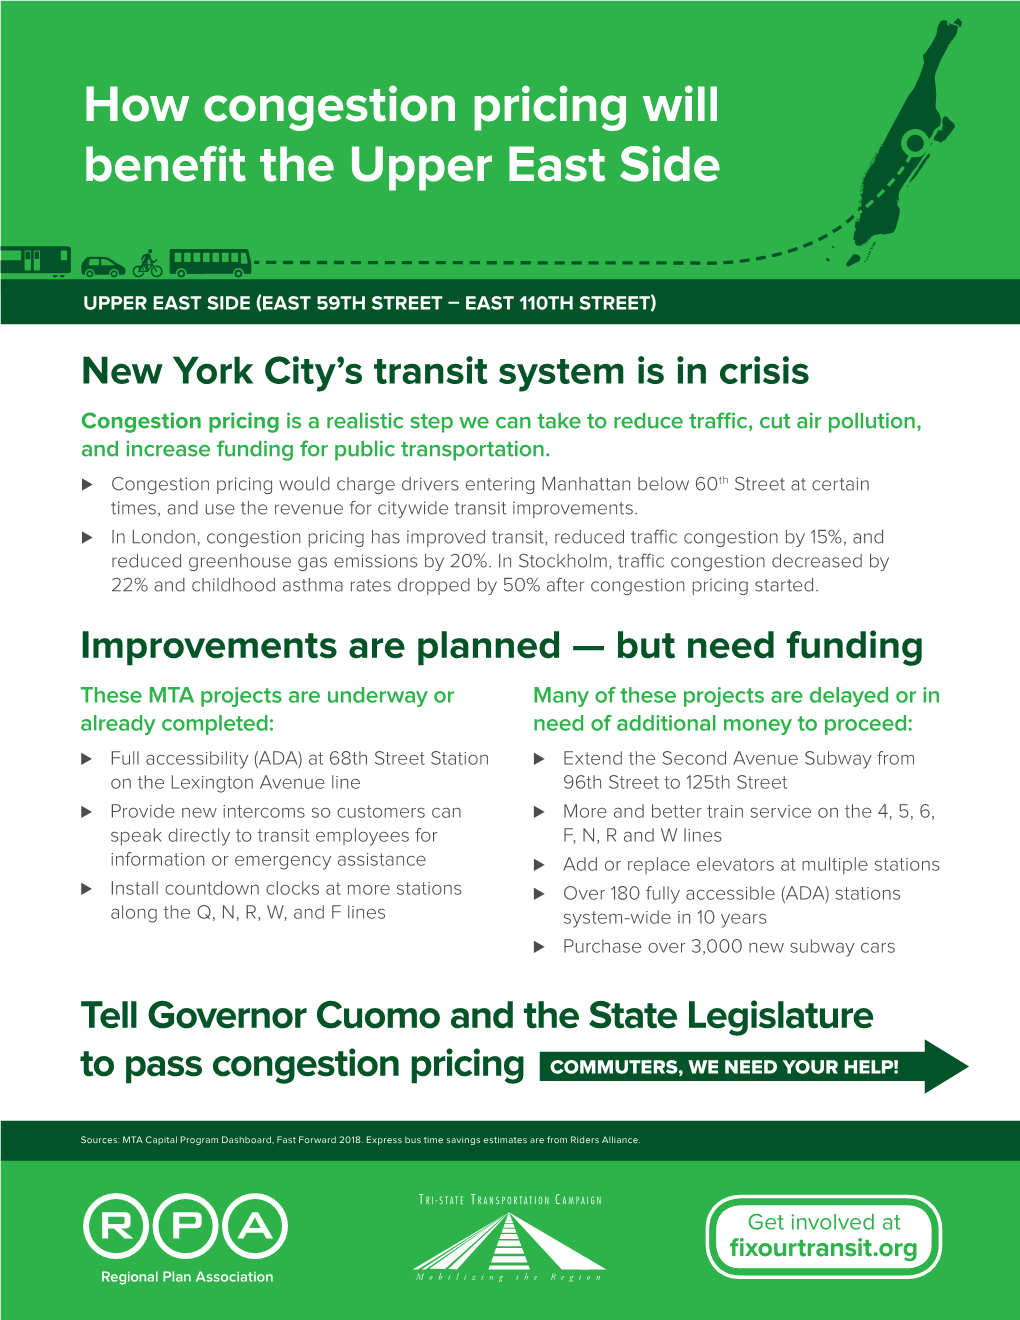 How Congestion Pricing Will Benefit the Upper East Side